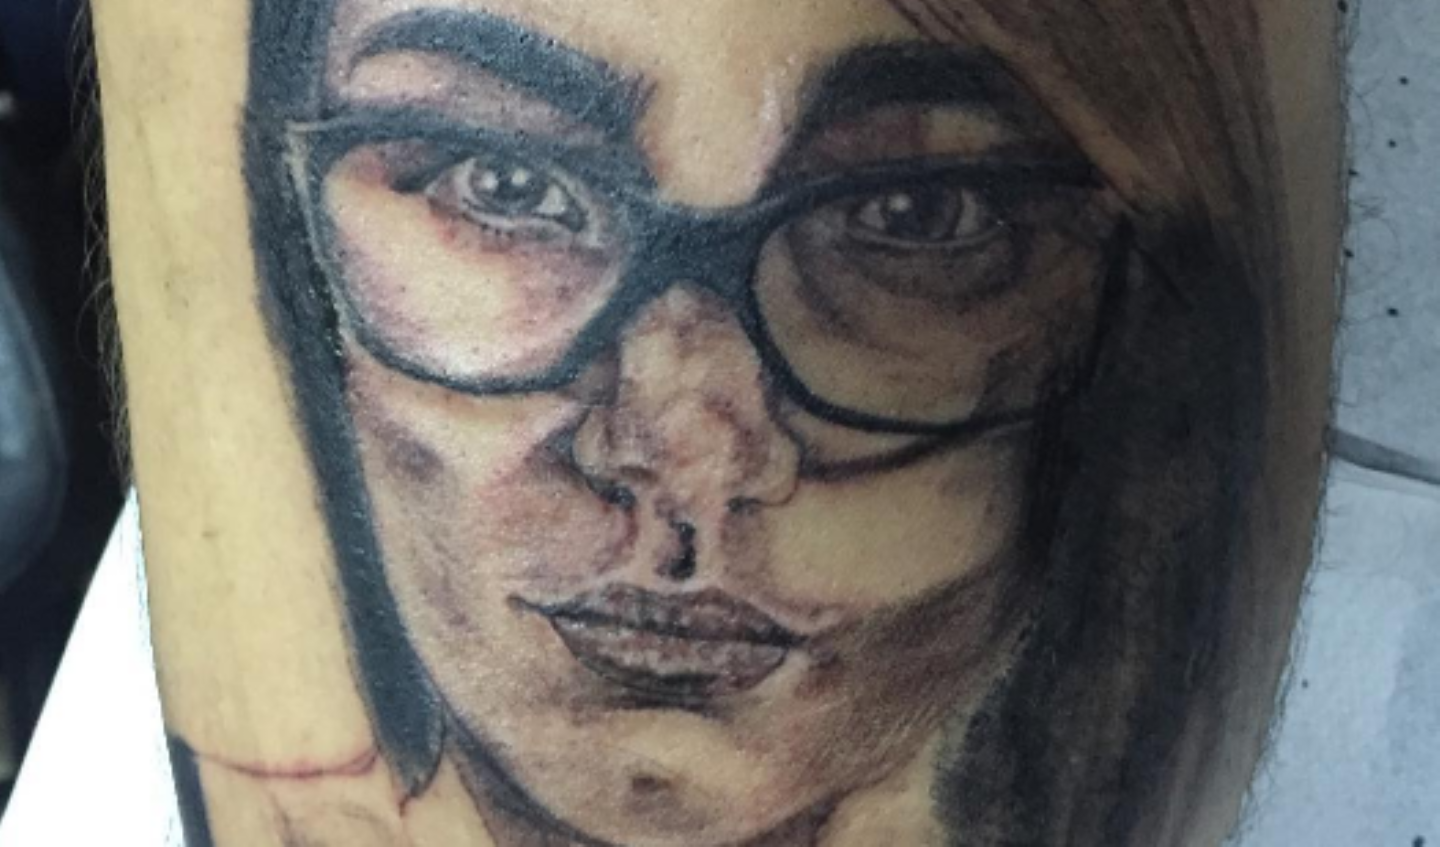 We Spoke to the Teenager Who Got Mia Khalifa's Face Tattooed On His Body